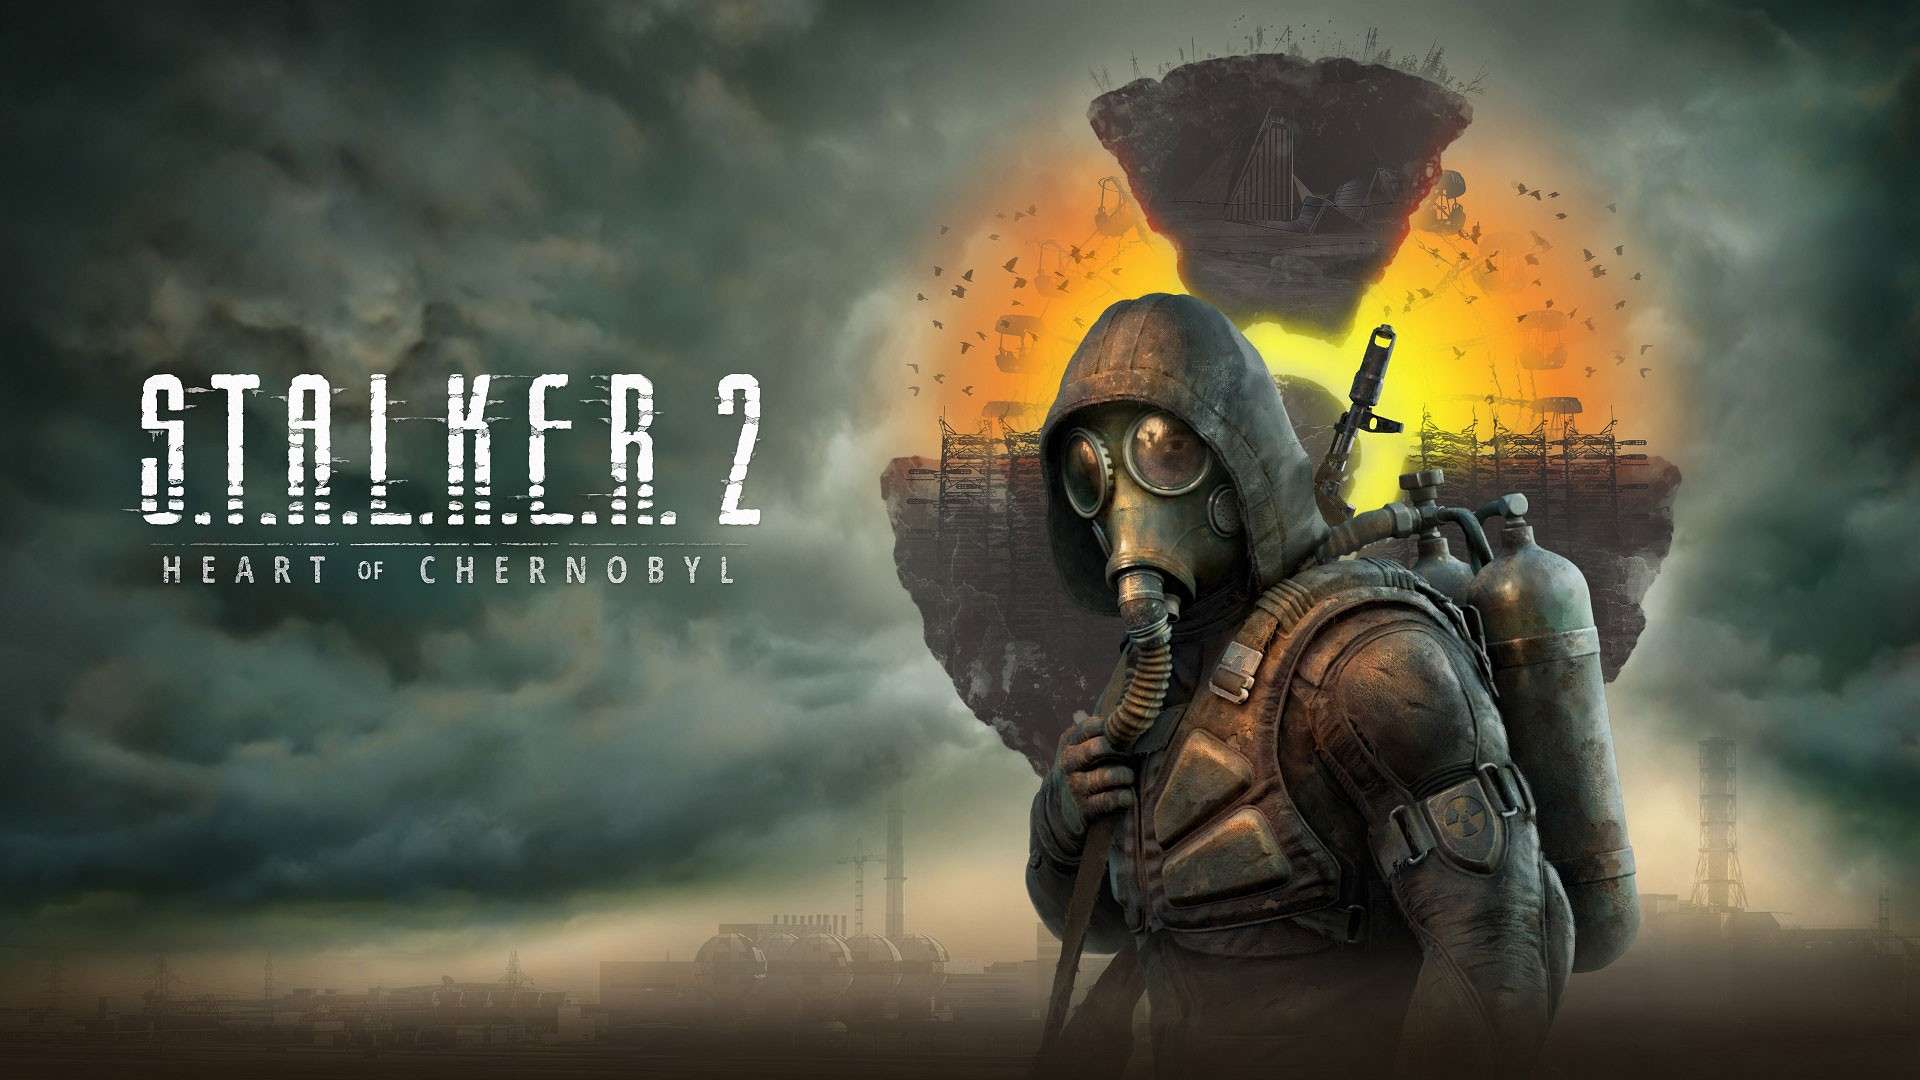 The Season of Delays Continues with Stalker 2